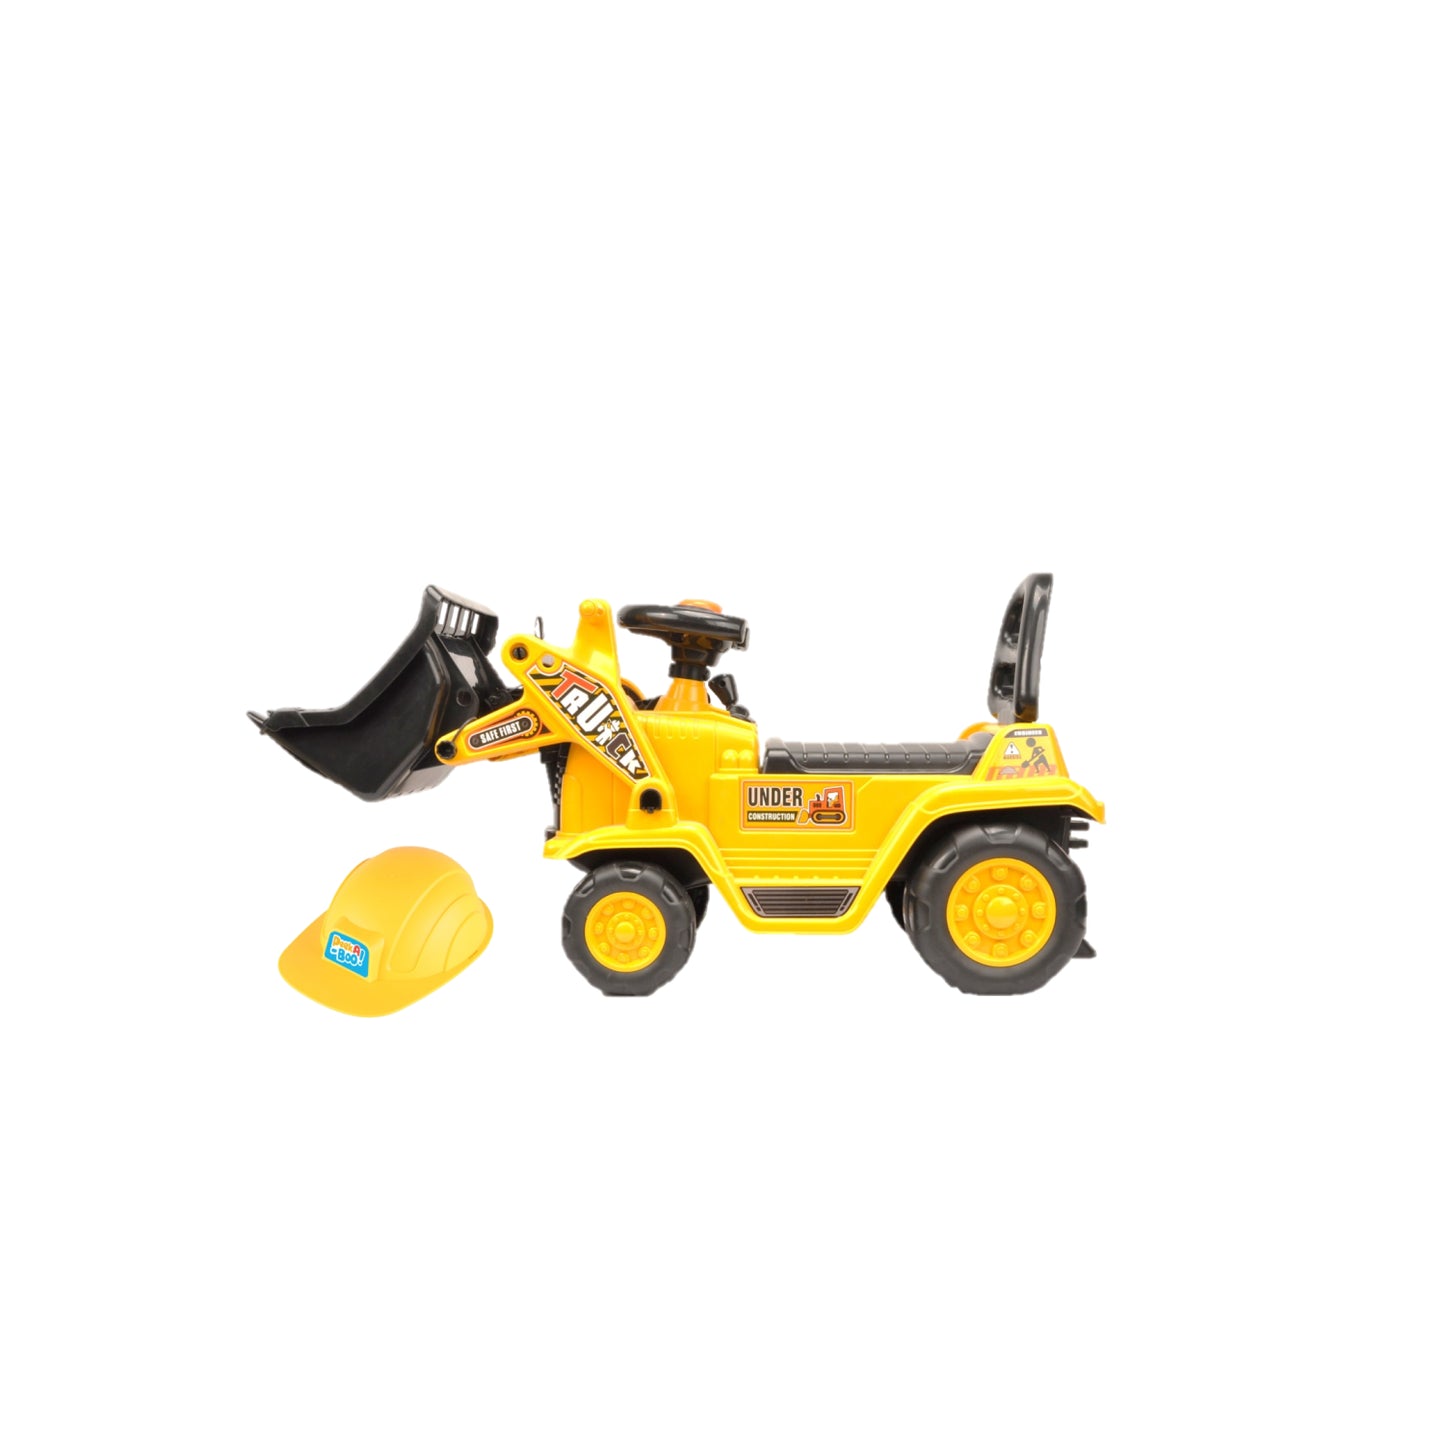 Construction vehicle with footrest - PEEK A BOO YD1007 excavator